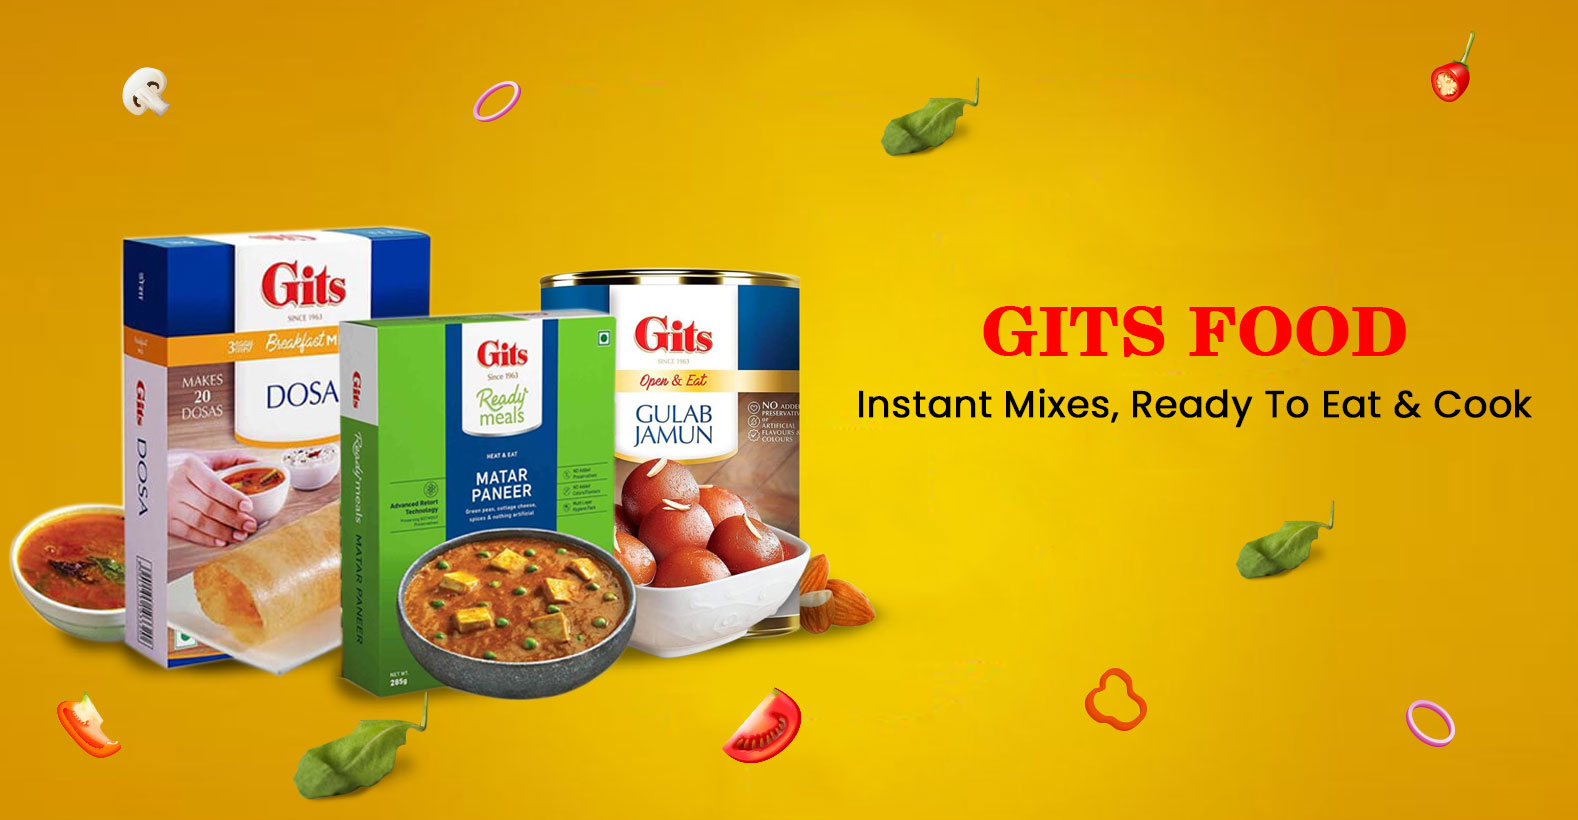 Gits Foods- Instant Mixes & Ready To Eat Products